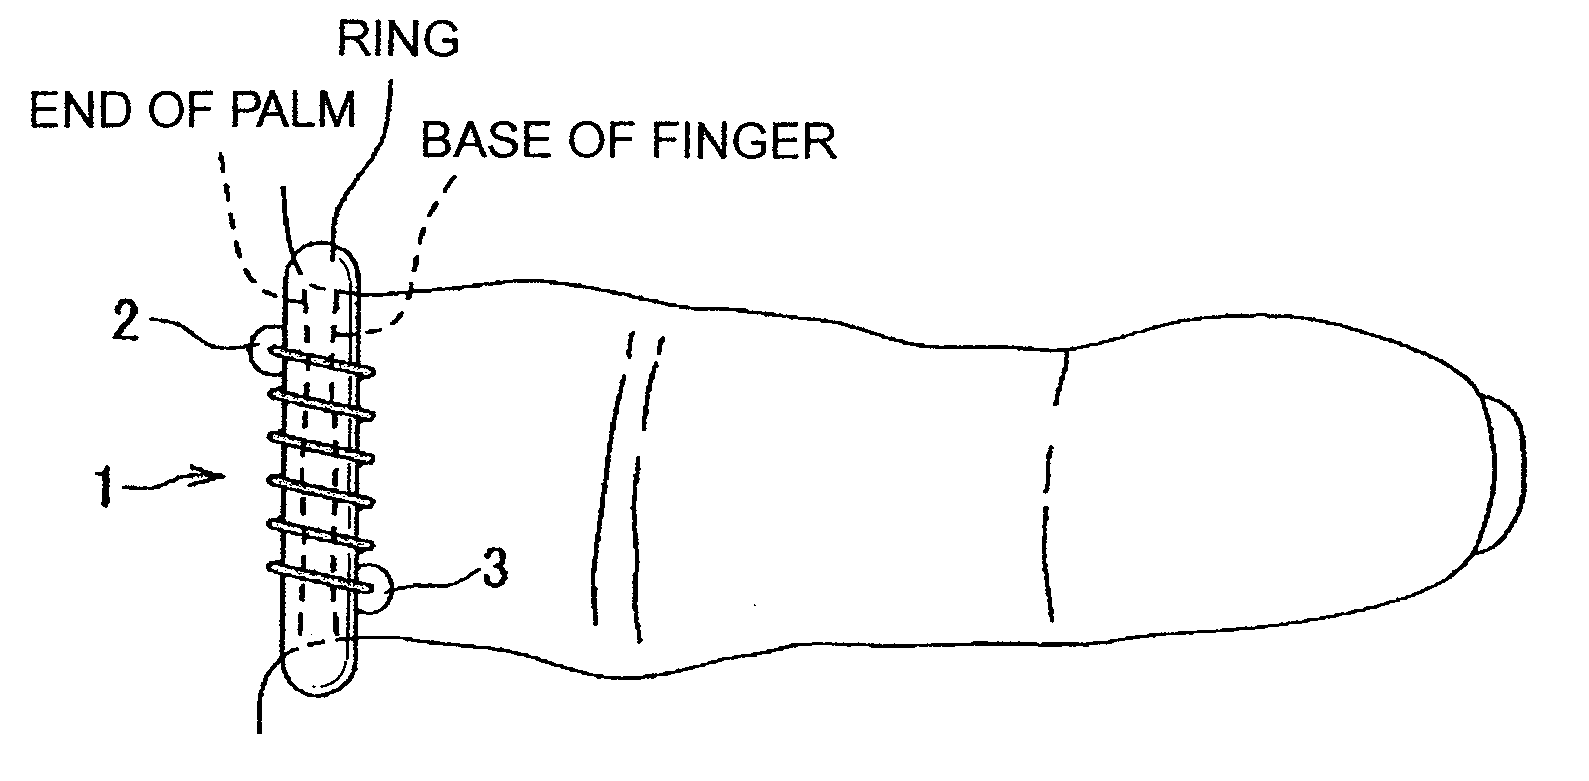 Fitting device for ring